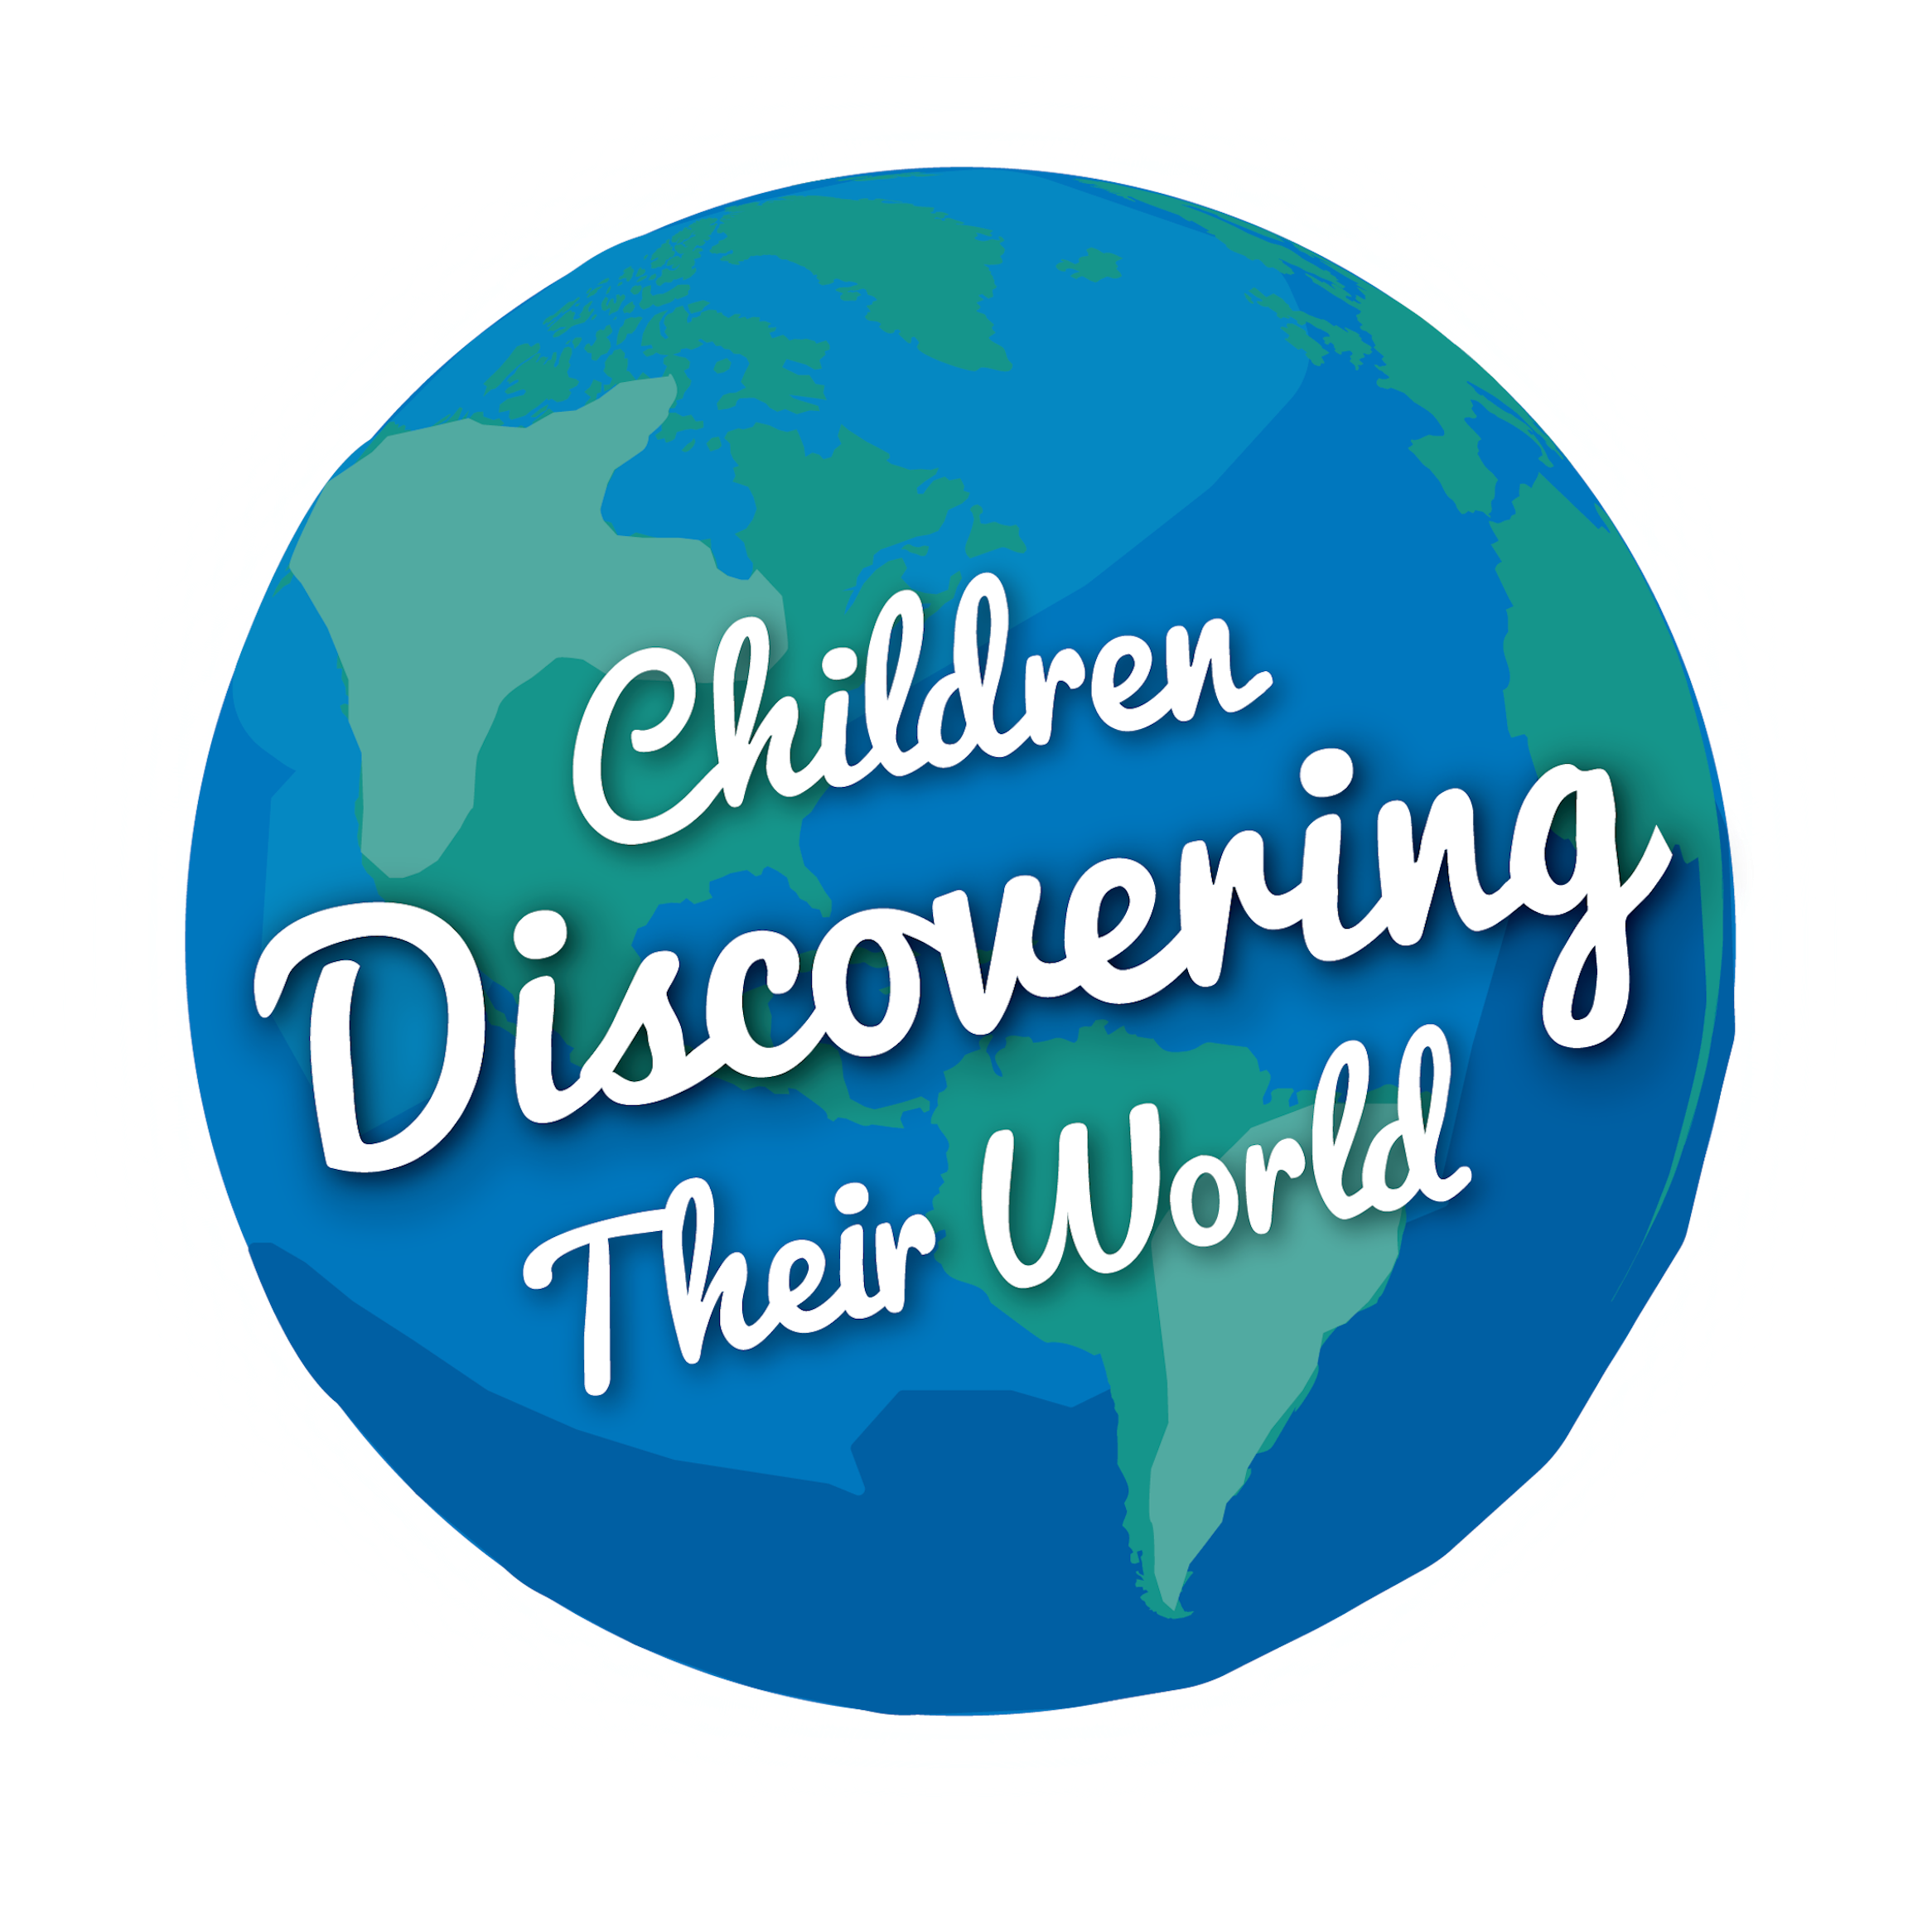 Illustration of a globe with text, "Children Discovering Their World"